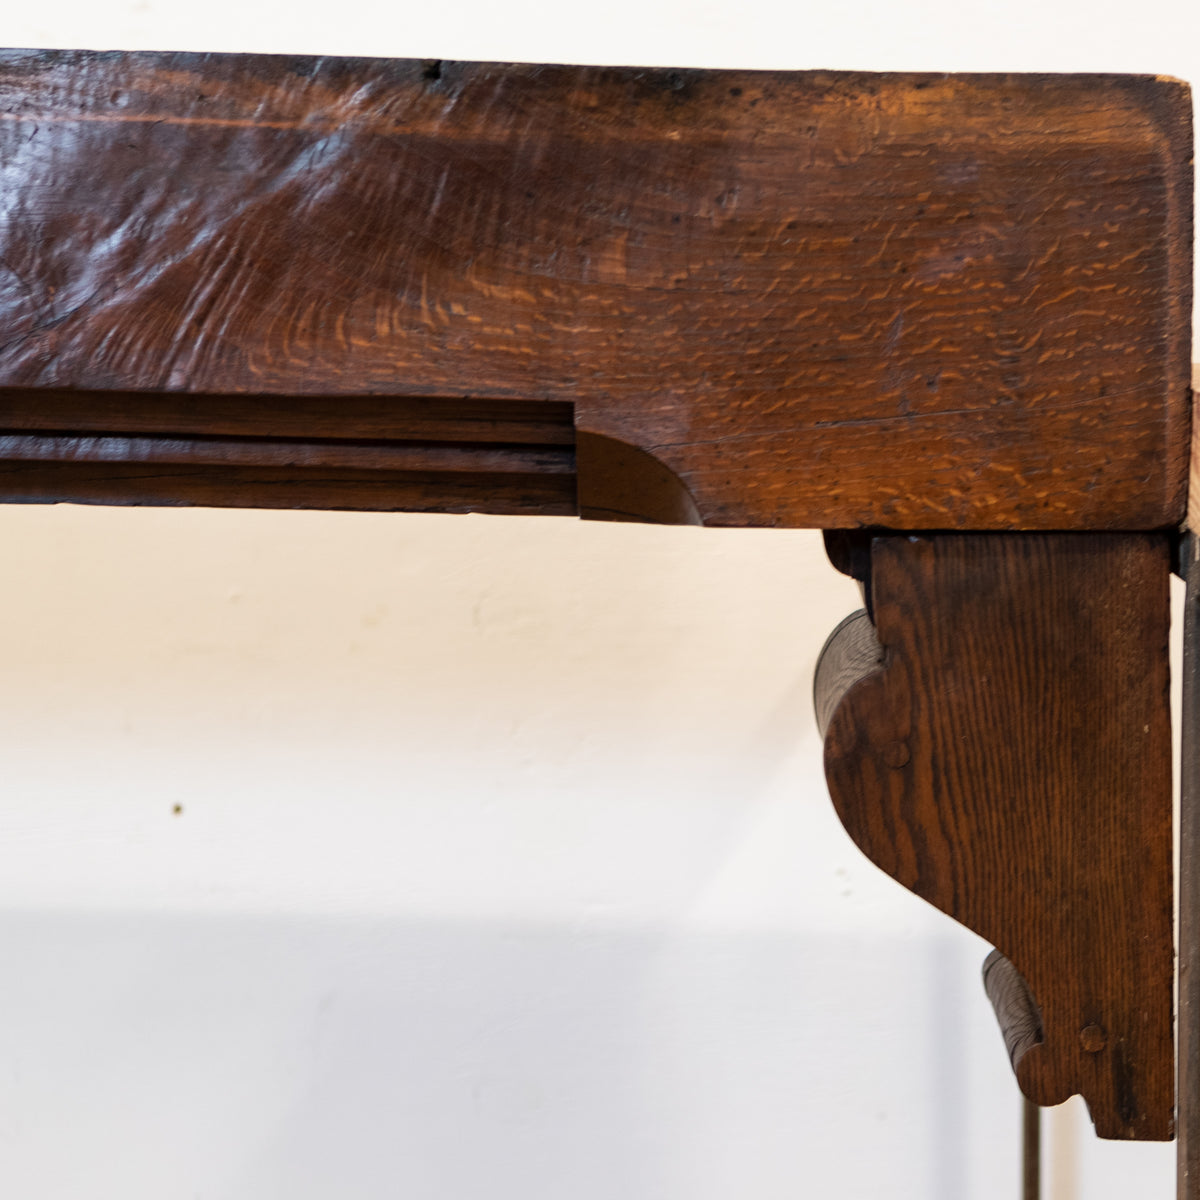 Antique Oak Decorative Beam Pediment with Corbels Inglenook Opening | The Architectural Forum